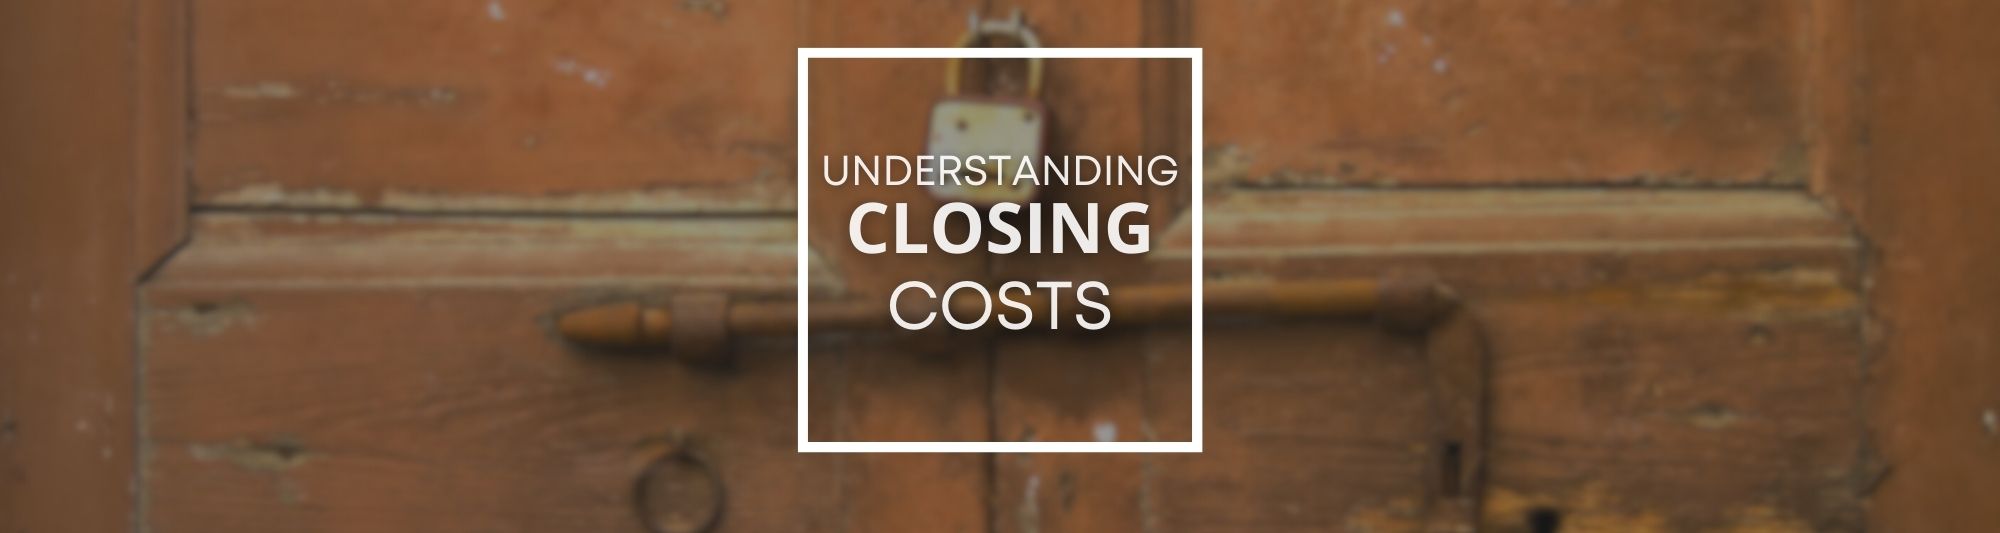 Featured photo for a blog post about closing costs.